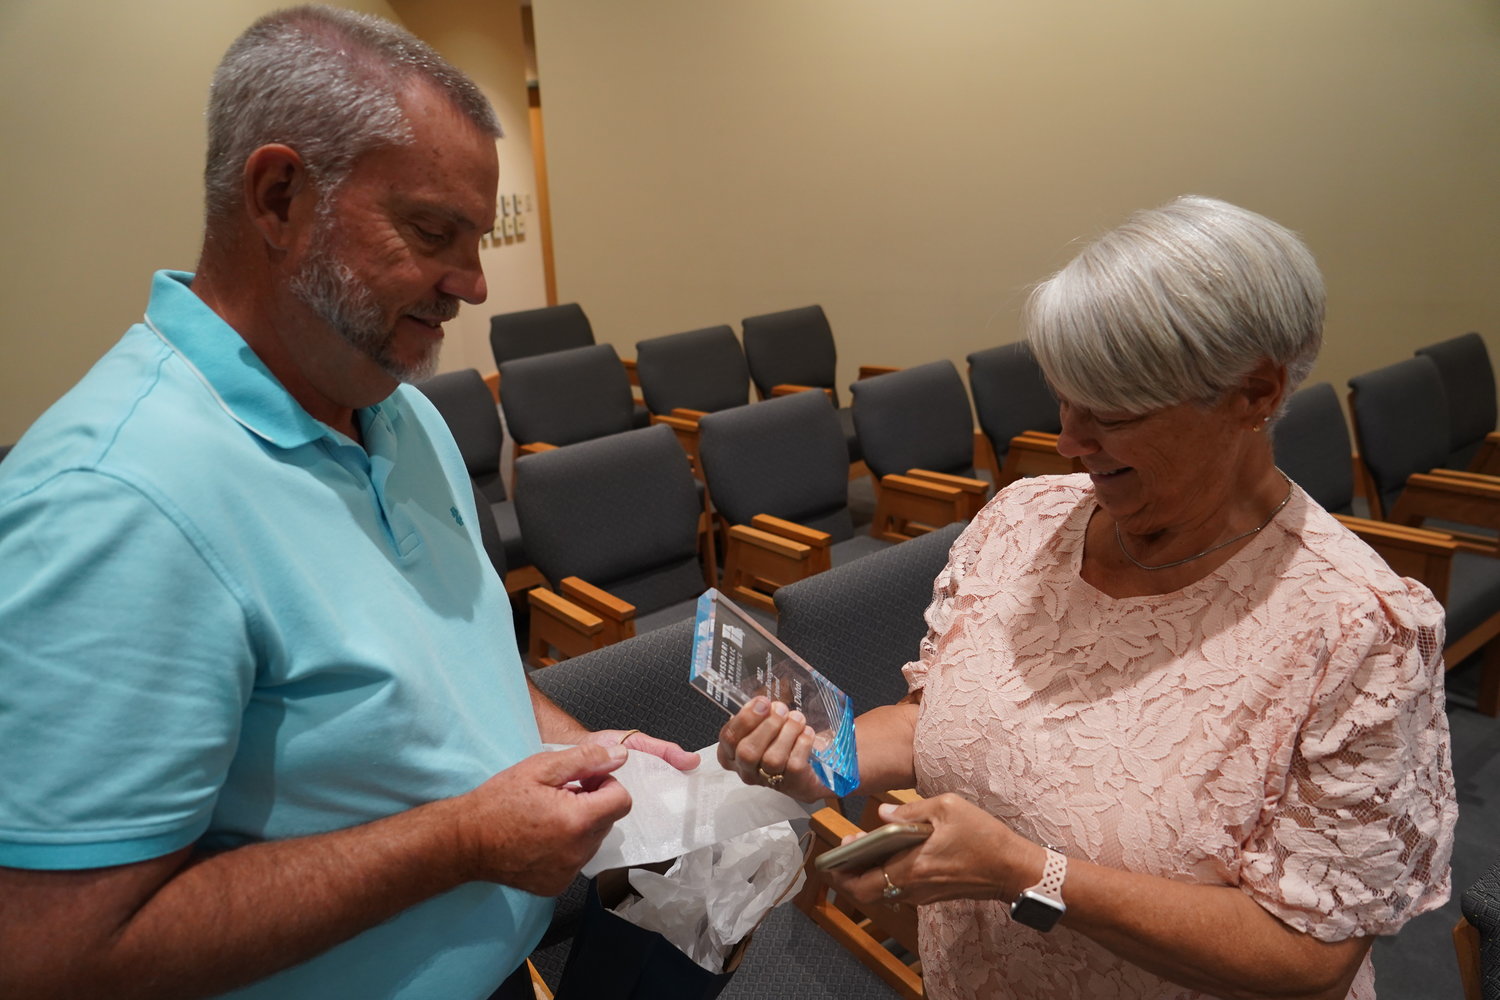 Carol Dutoi admires the 2022 Missouri Catholic Conference Citizen Recognition Award plaque that her husband, Dean Dutoi, received on Aug. 30.